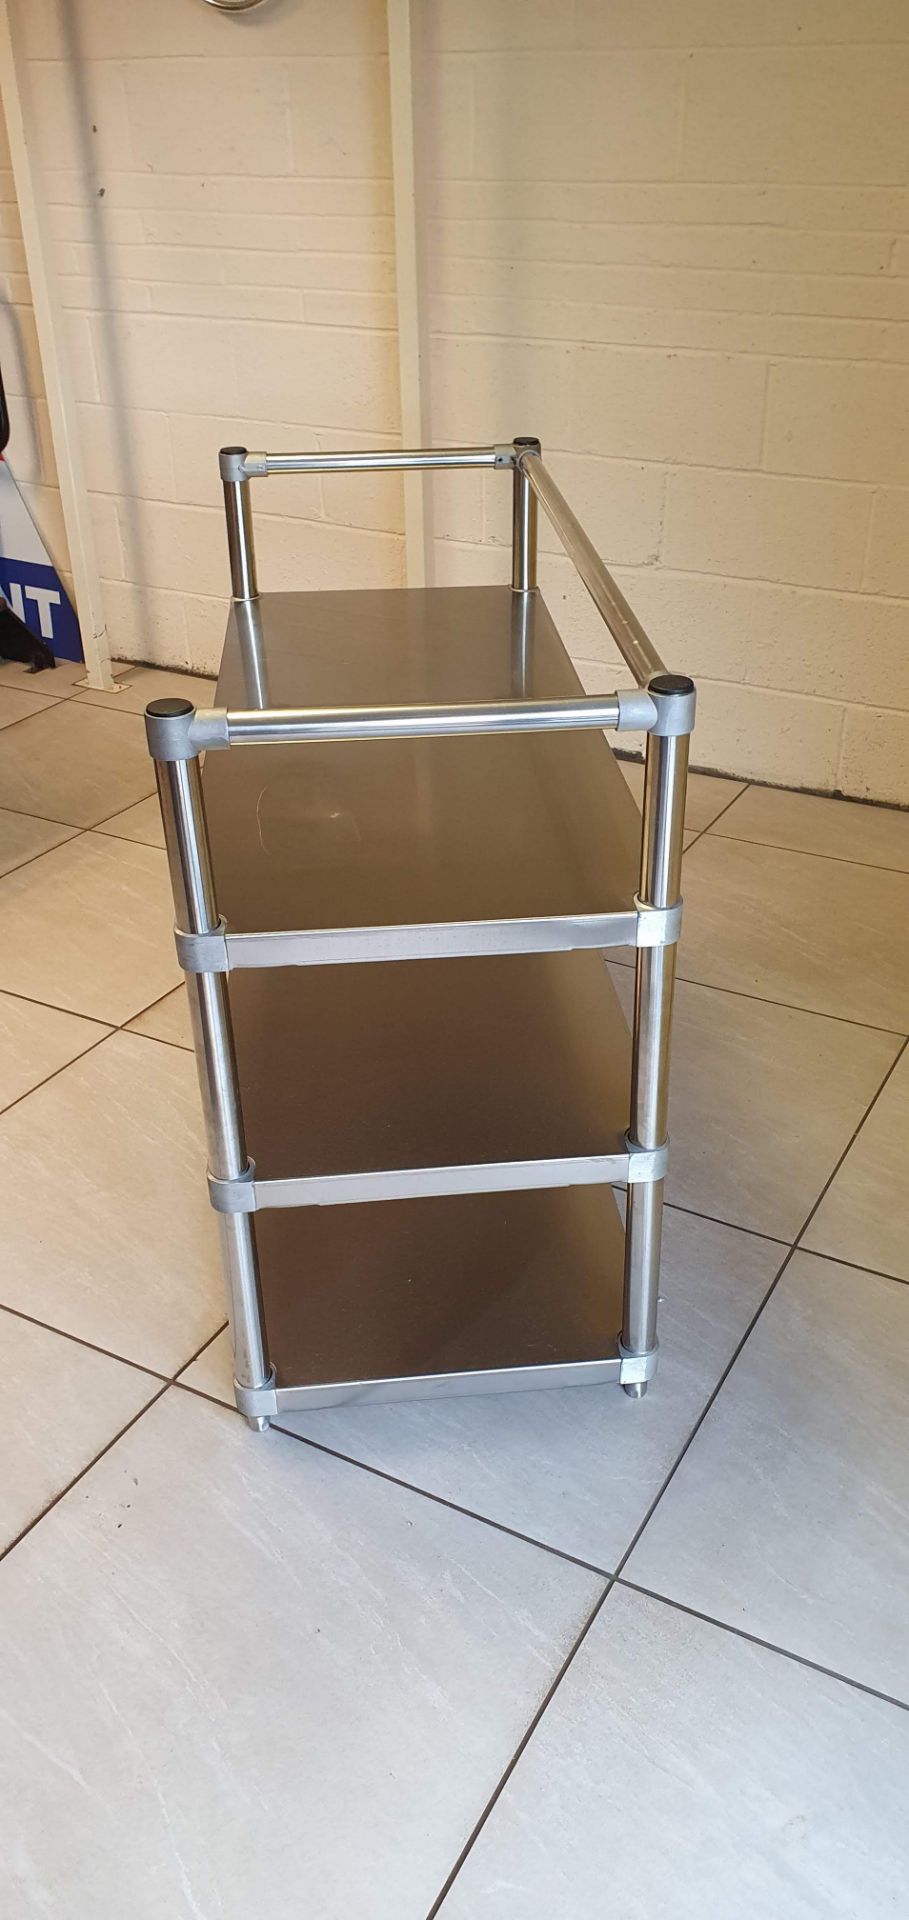 Stainless Steel storage rack / stand - Image 2 of 3